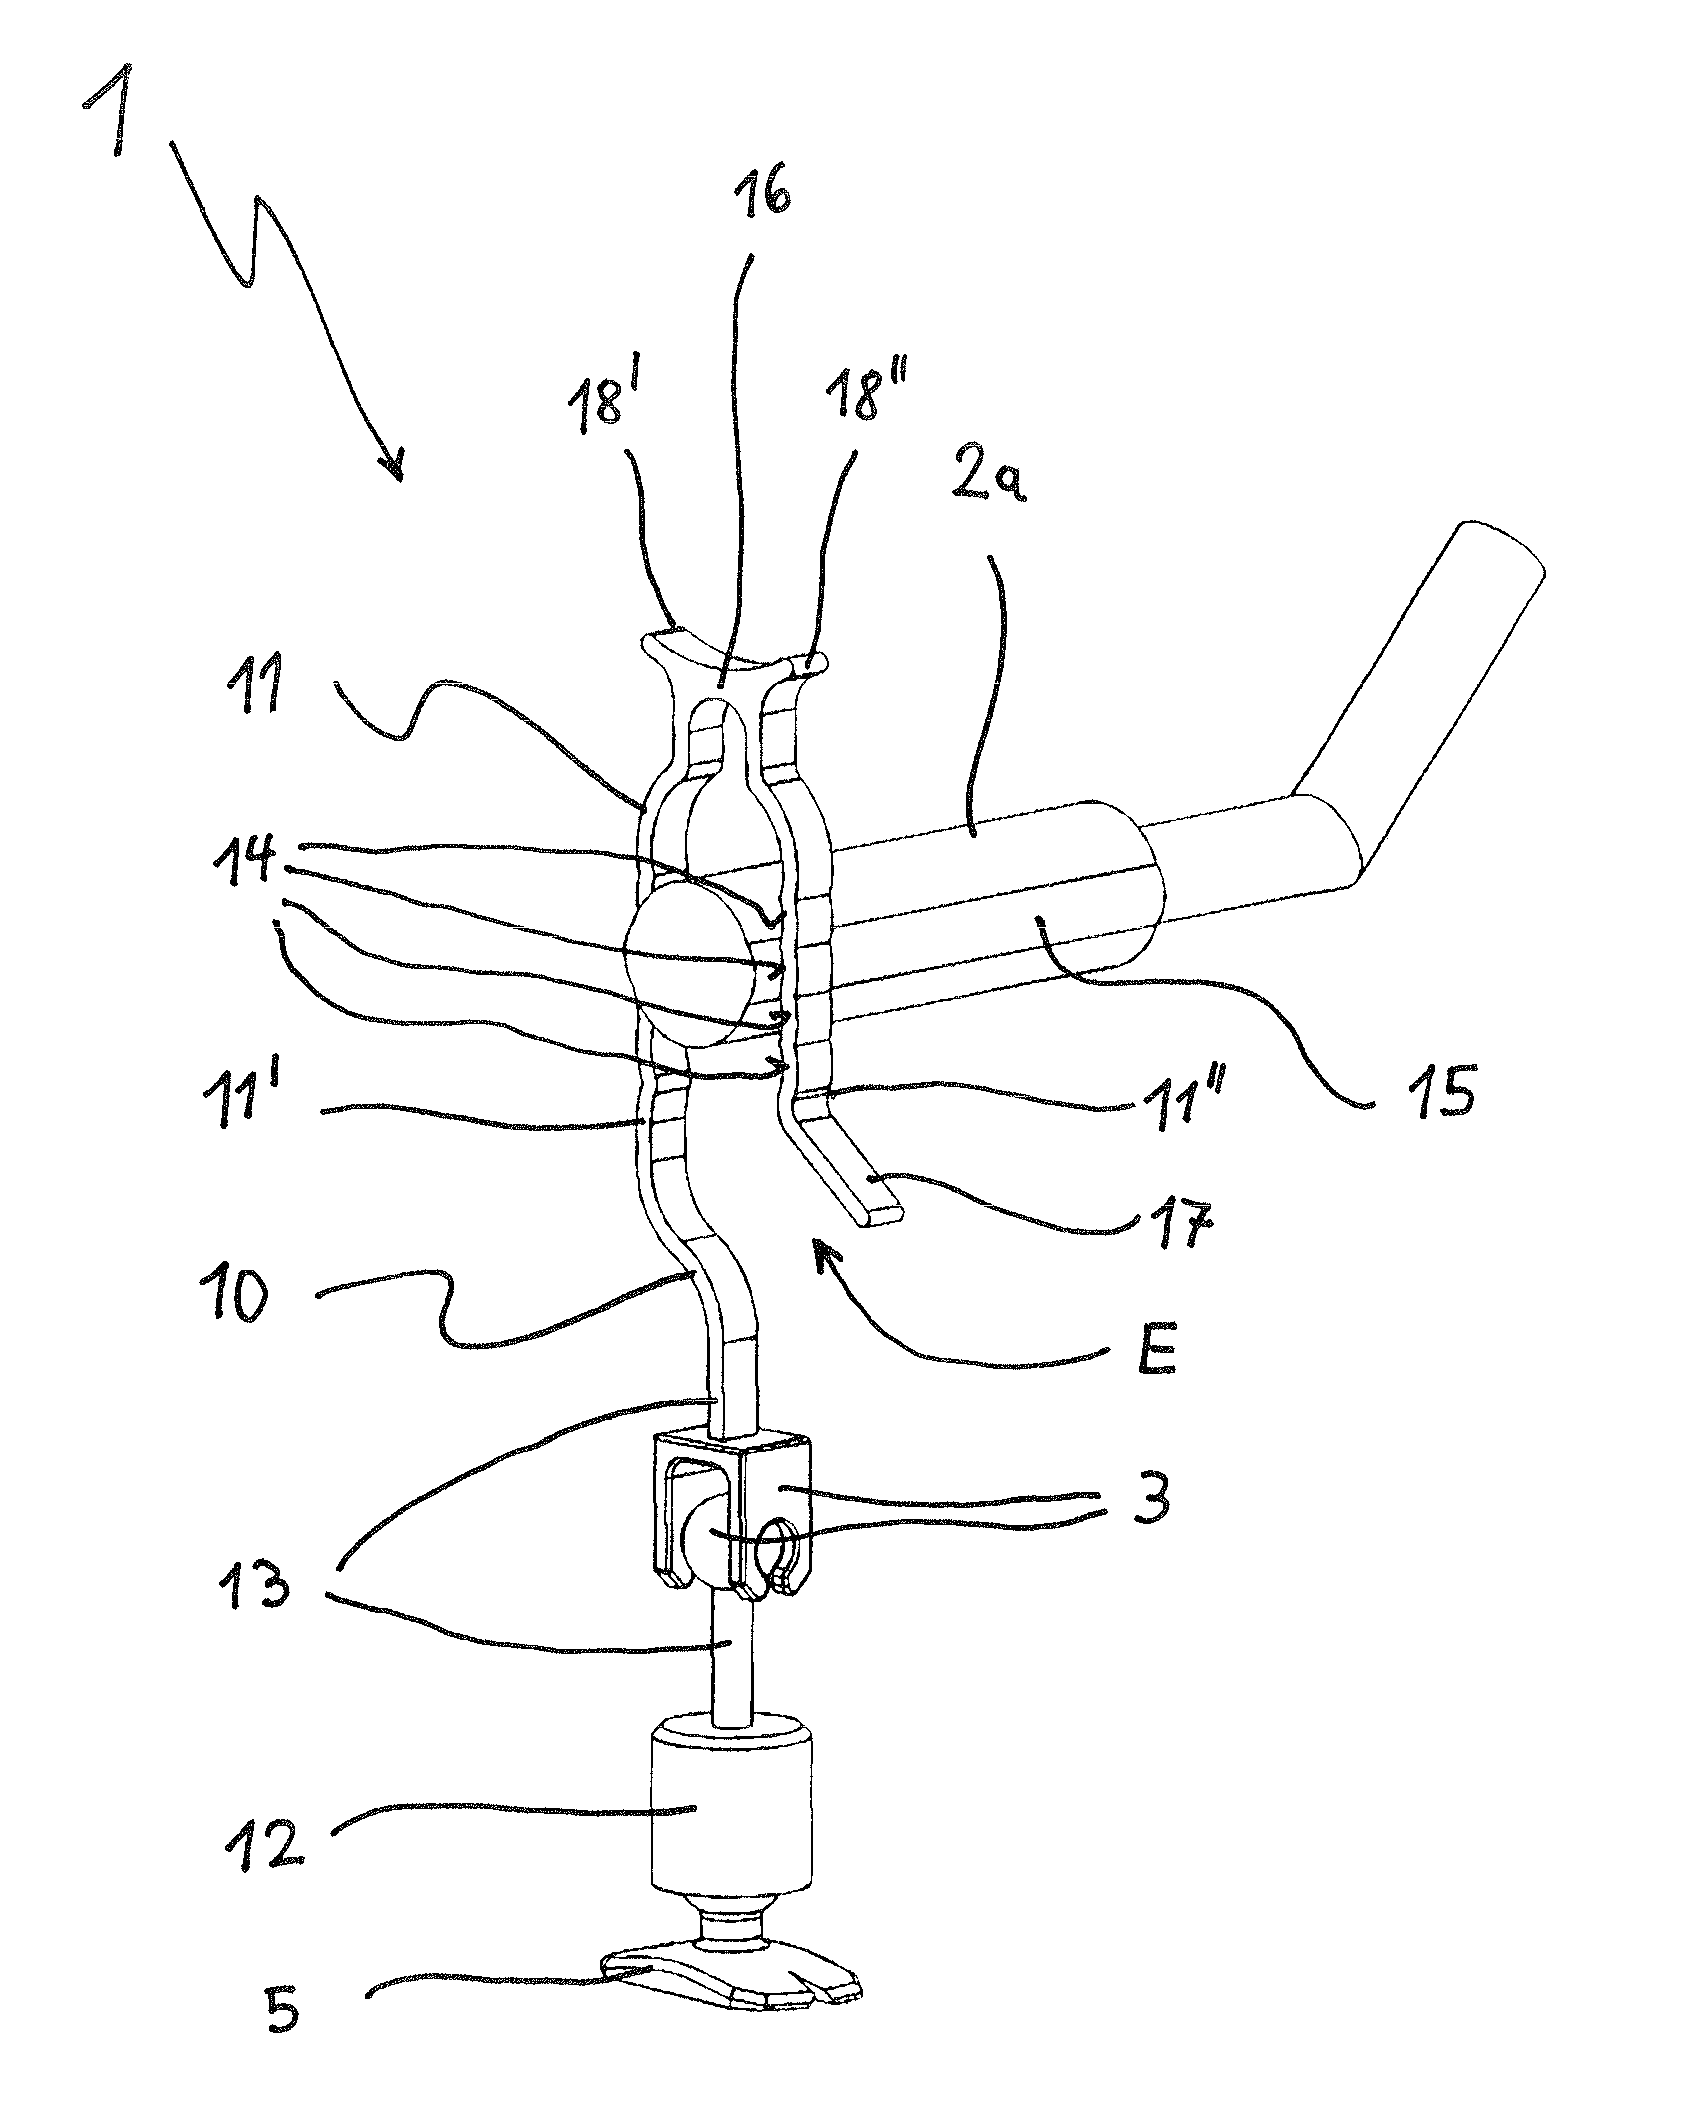 Device for variable-length fixing of the actuator end piece of an active hearing implant in the middle ear